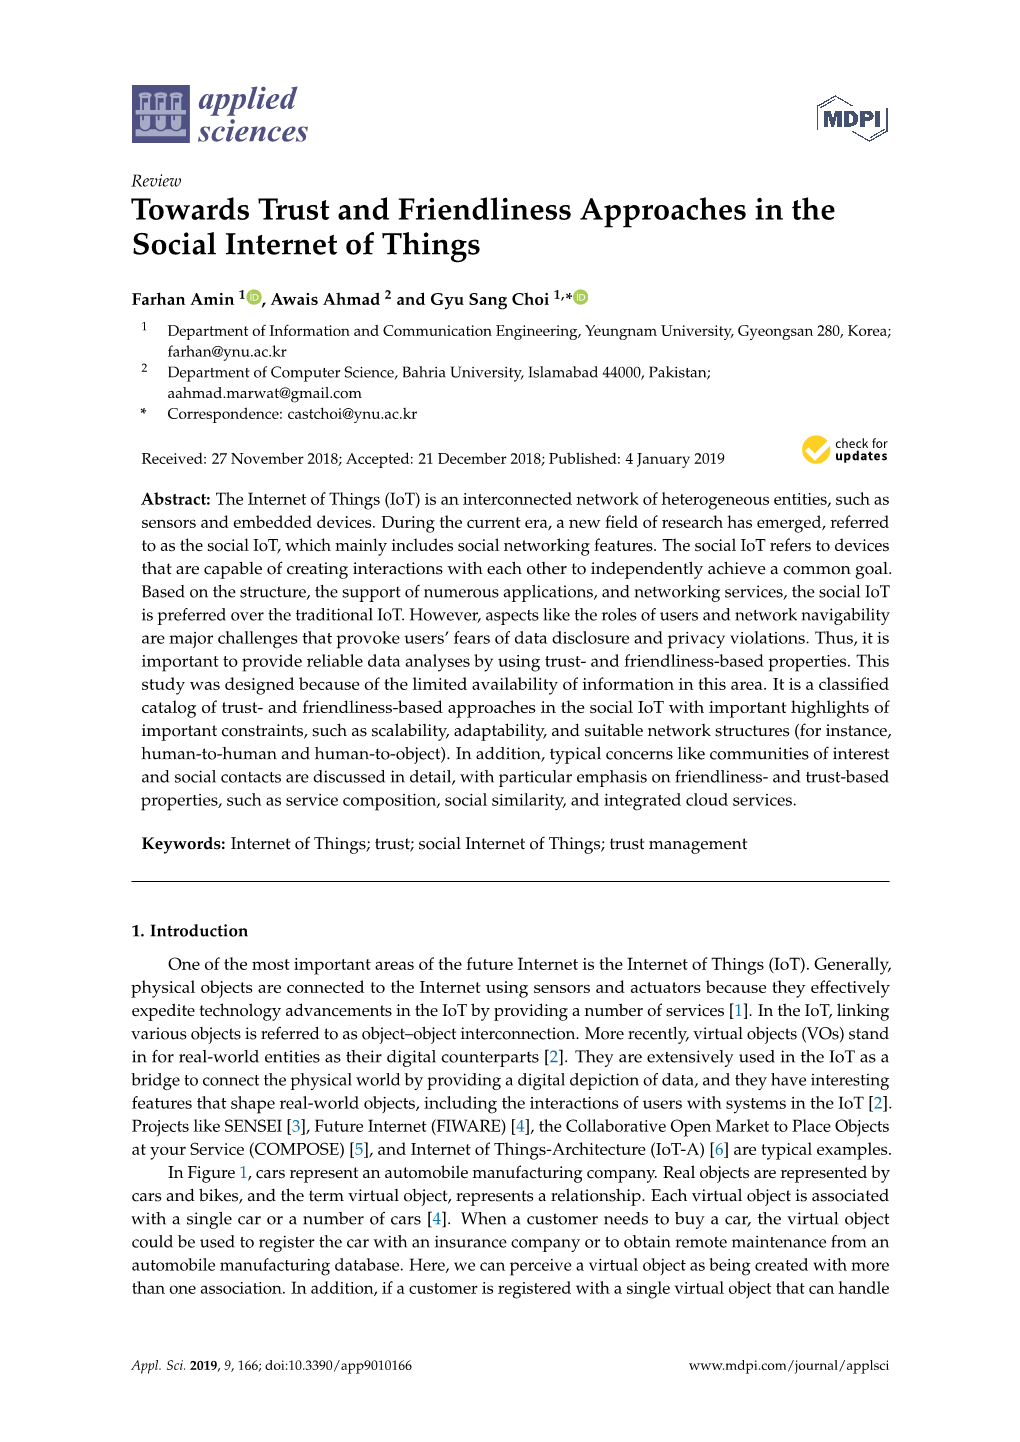 Towards Trust and Friendliness Approaches in the Social Internet of Things